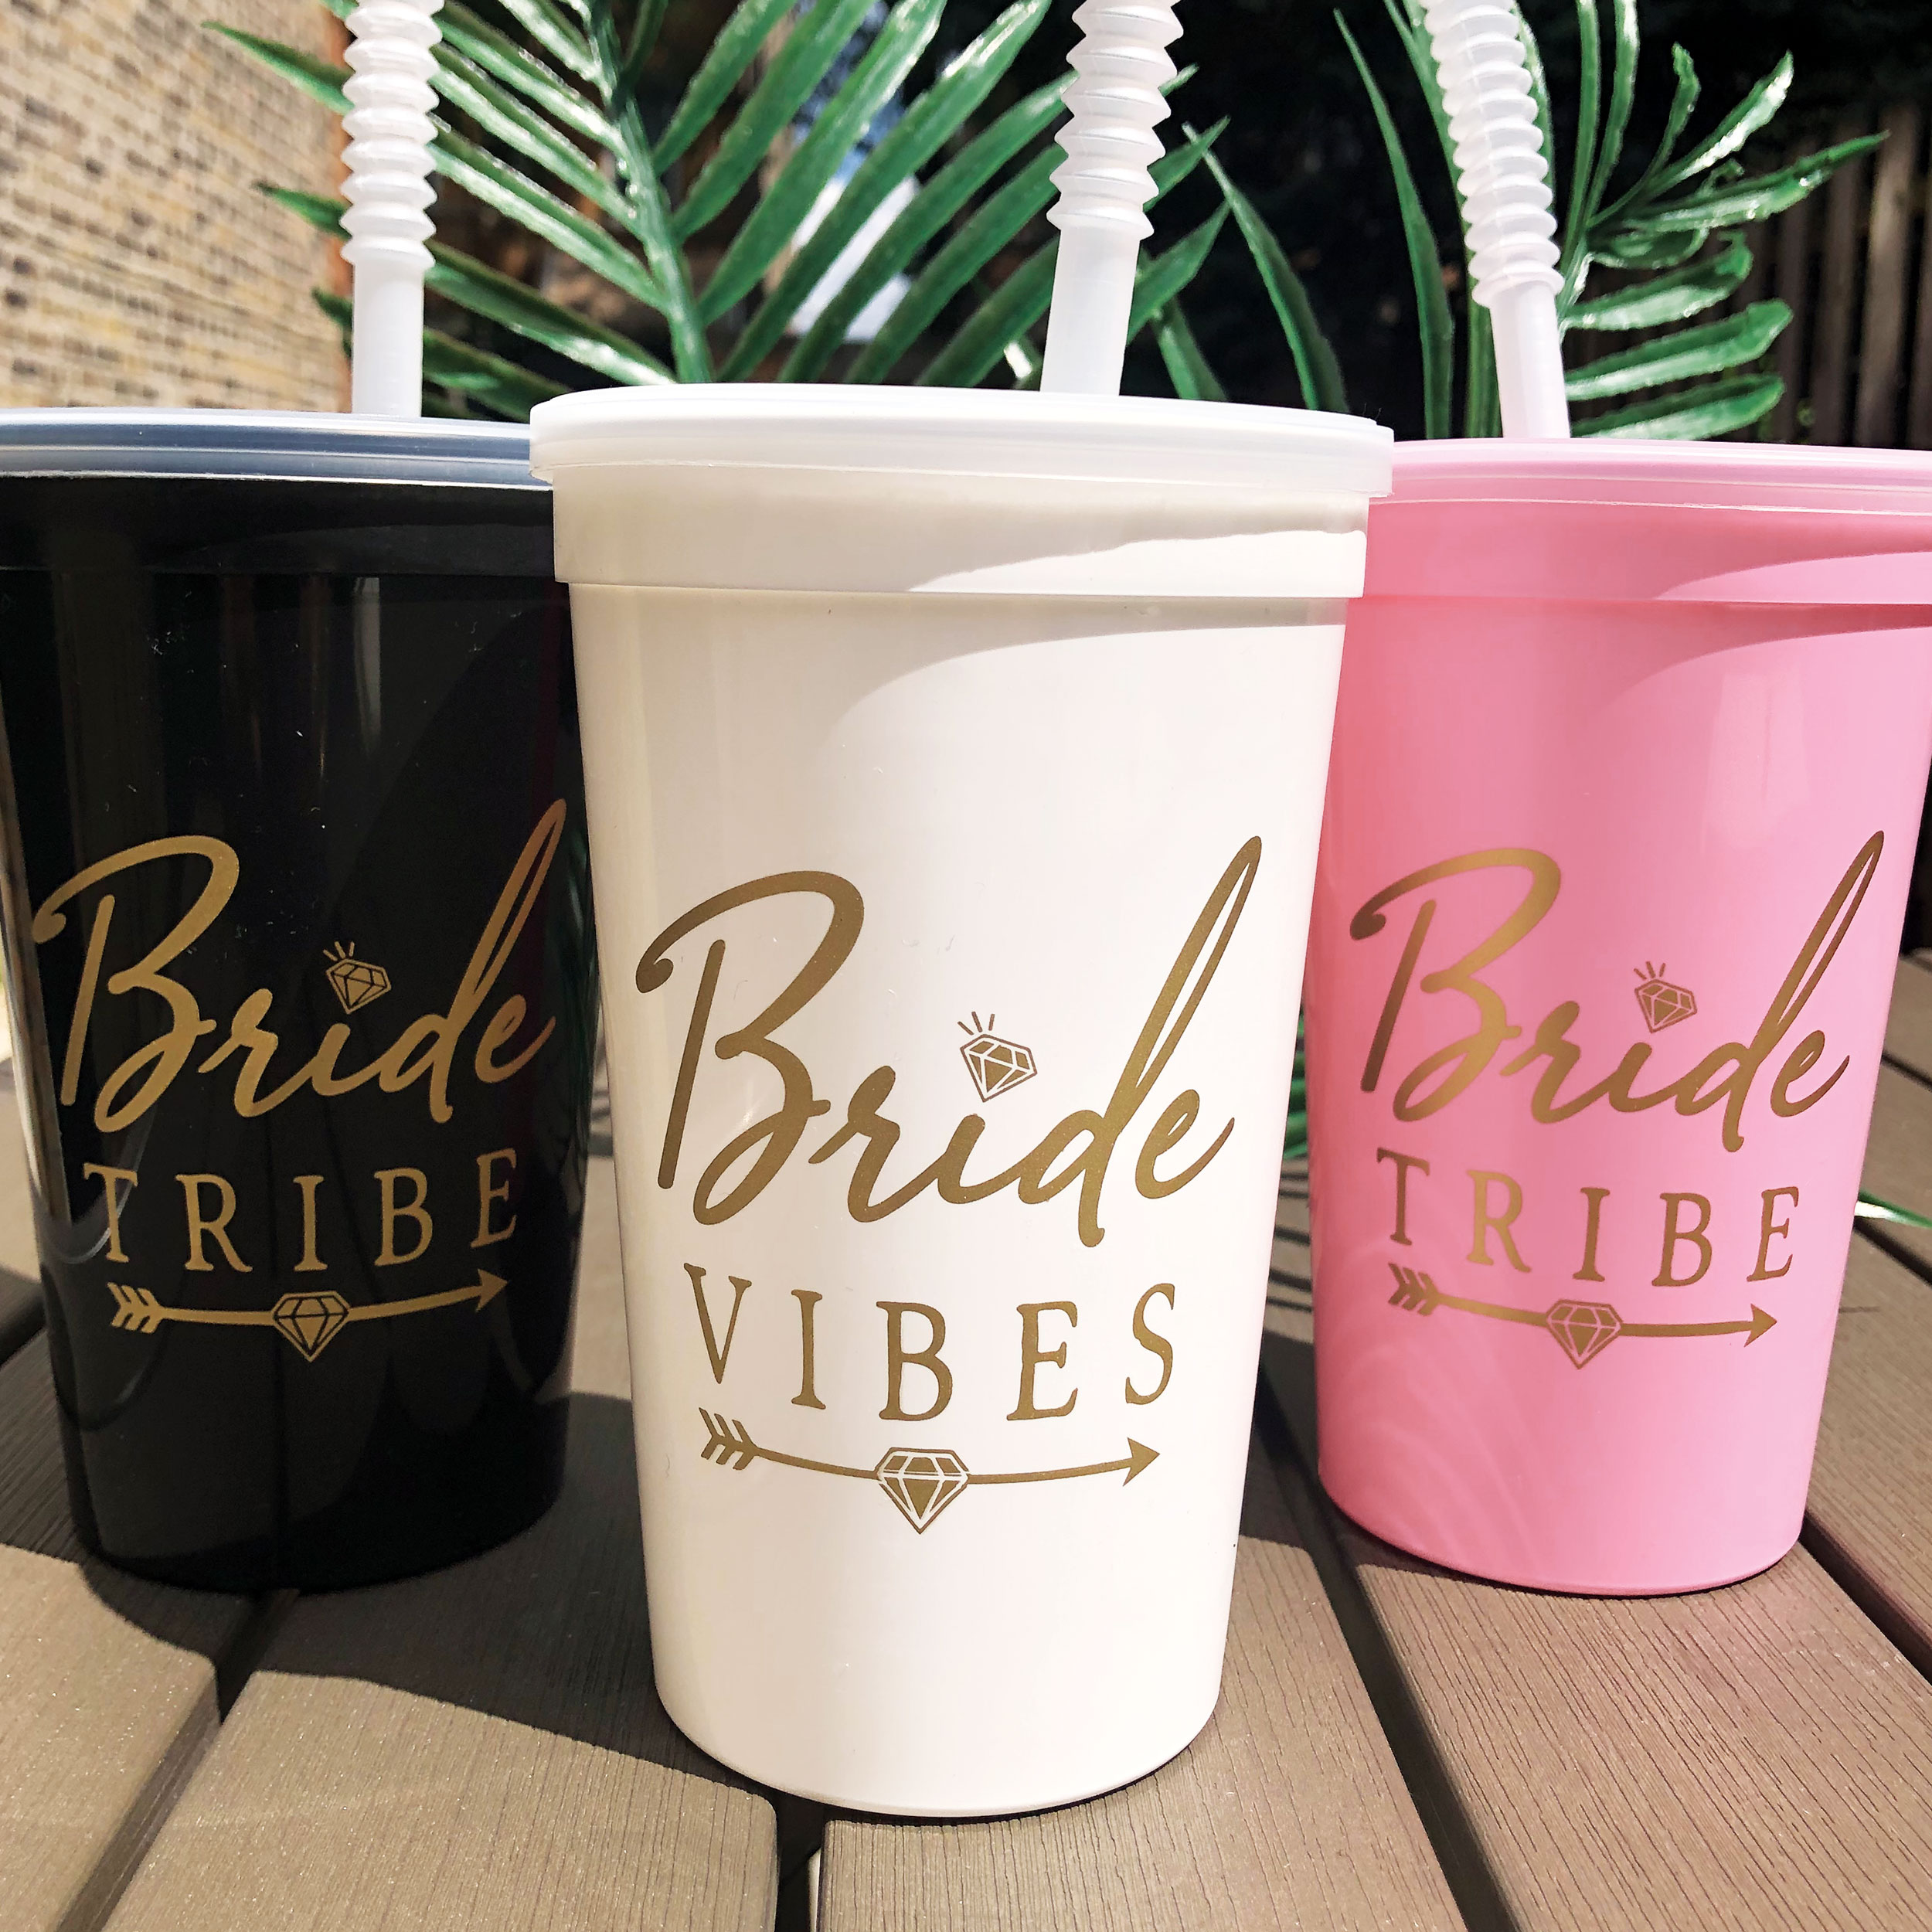 https://cdn11.bigcommerce.com/s-5grzuu6/images/stencil/original/products/4644/29470/Bride-and-Tribe-Cups-3__43243.1653685286.jpg?c=2